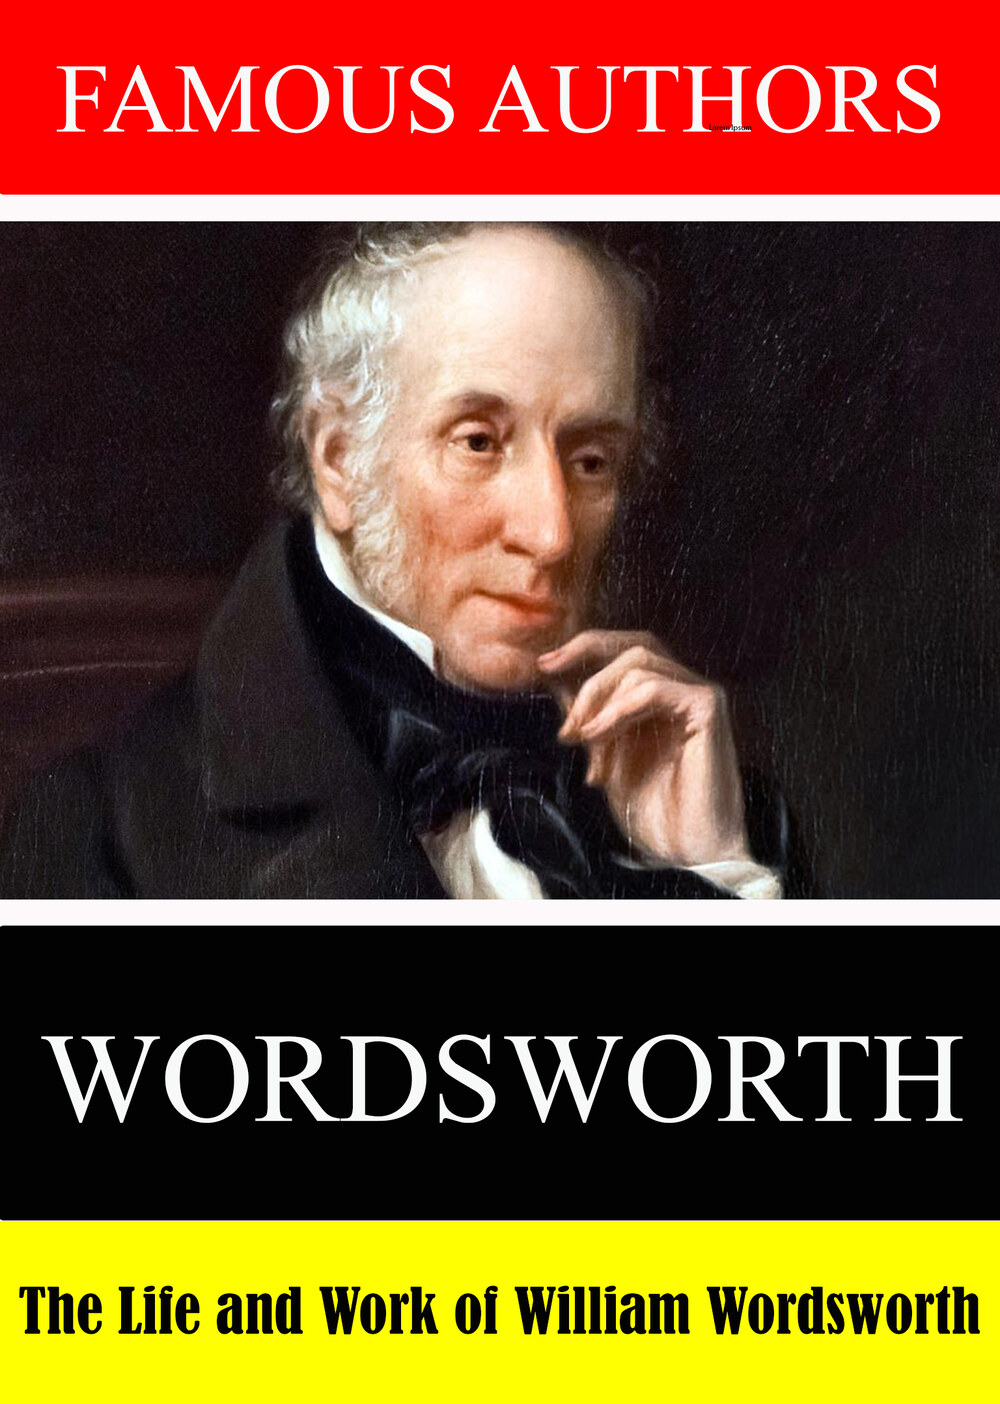 L7914 - Famous Authors:  The Life and Work of William Wordsworth